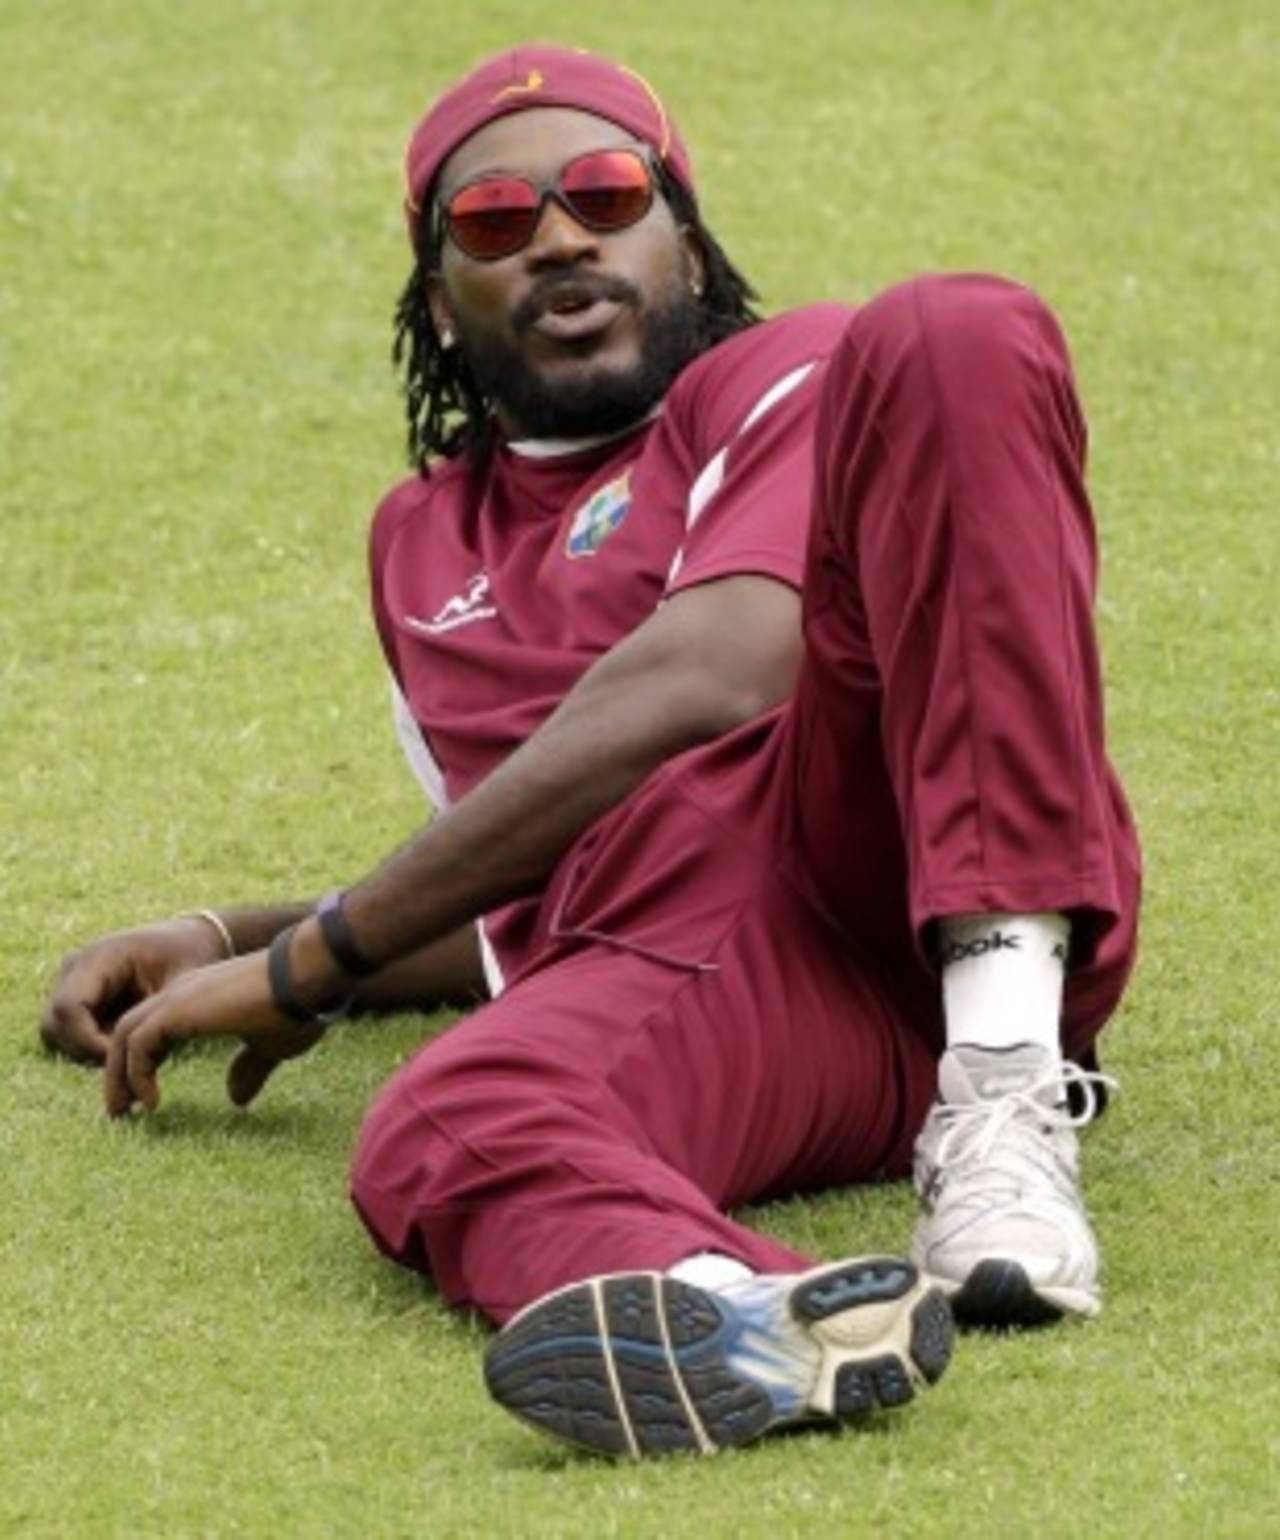 Chris Gayle relaxes during a training session on the eve of West Indies' quarter-final against Pakistan, World Cup, Mirpur, March 22, 2011